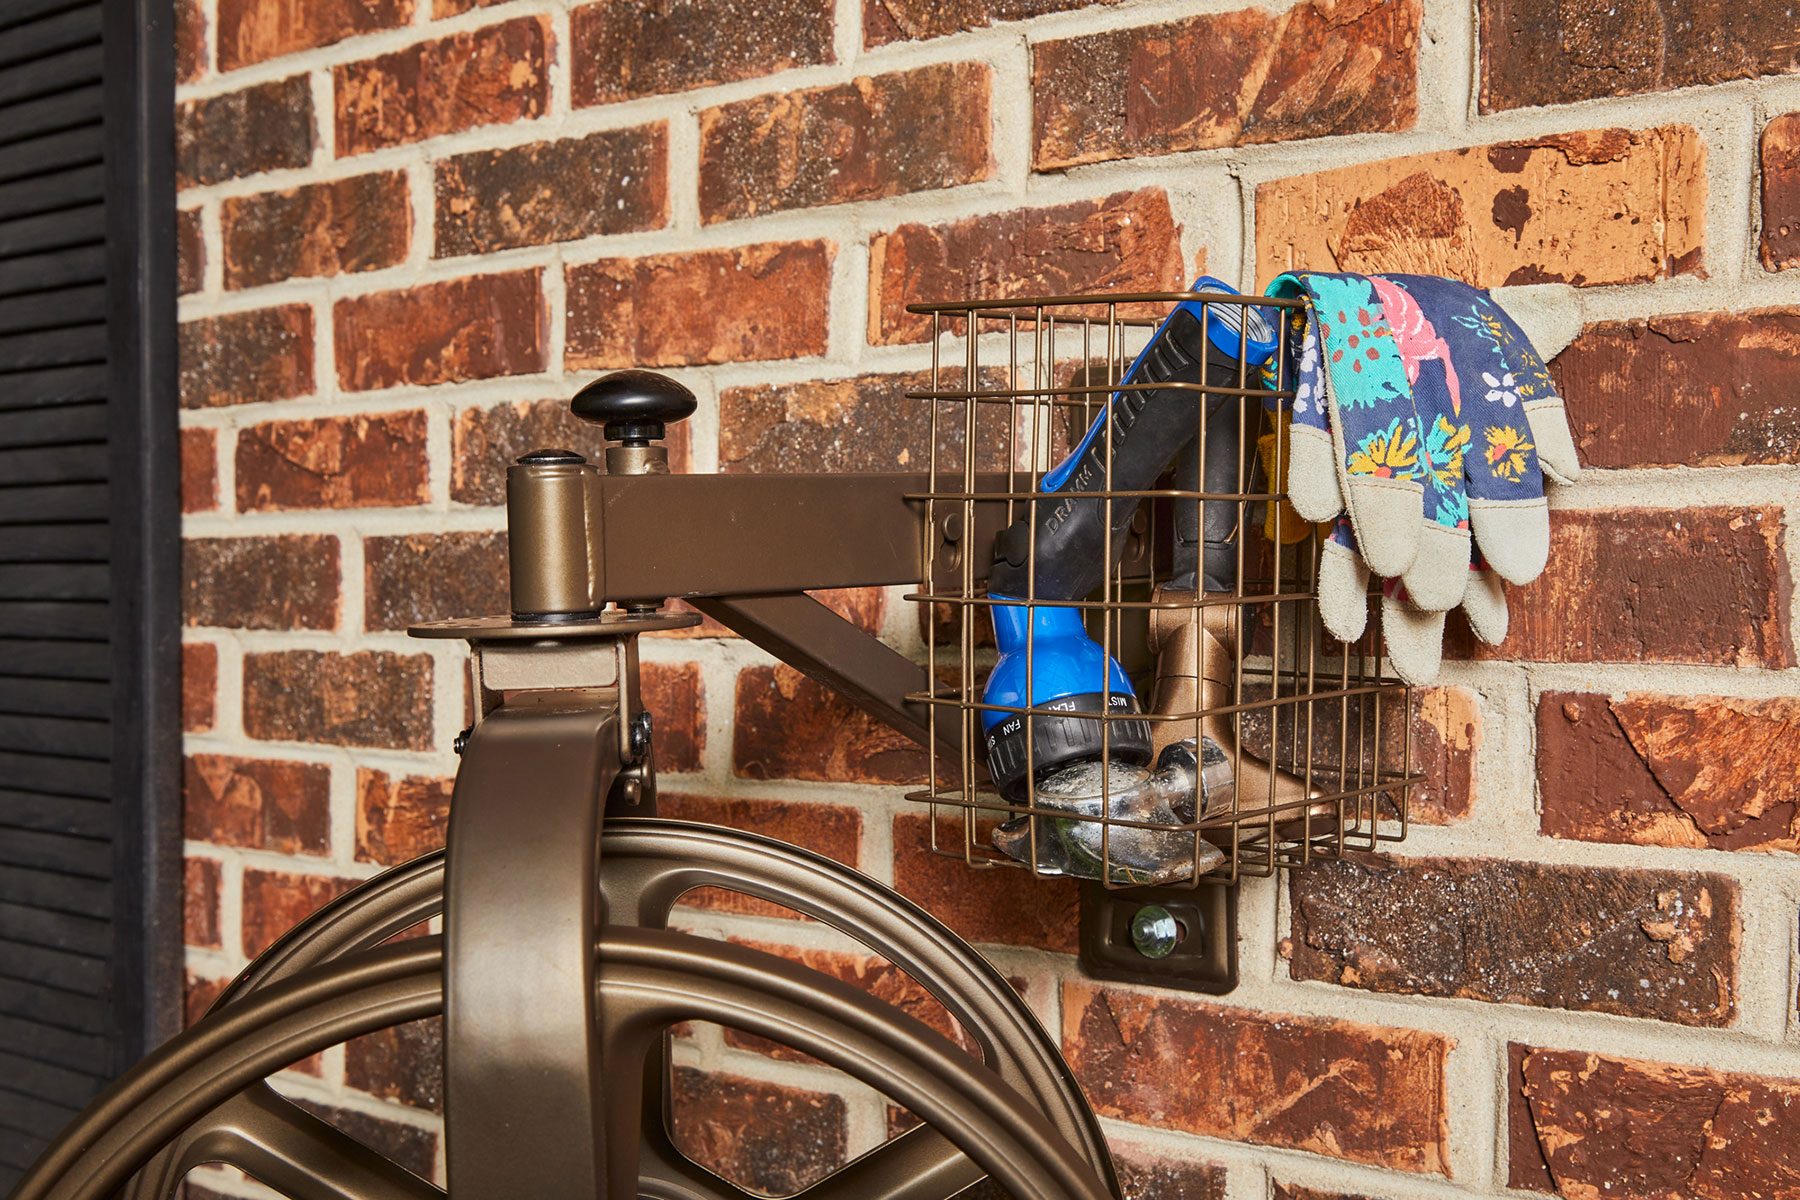 Review: Our Gardener Tested the Liberty Garden Hose Reel